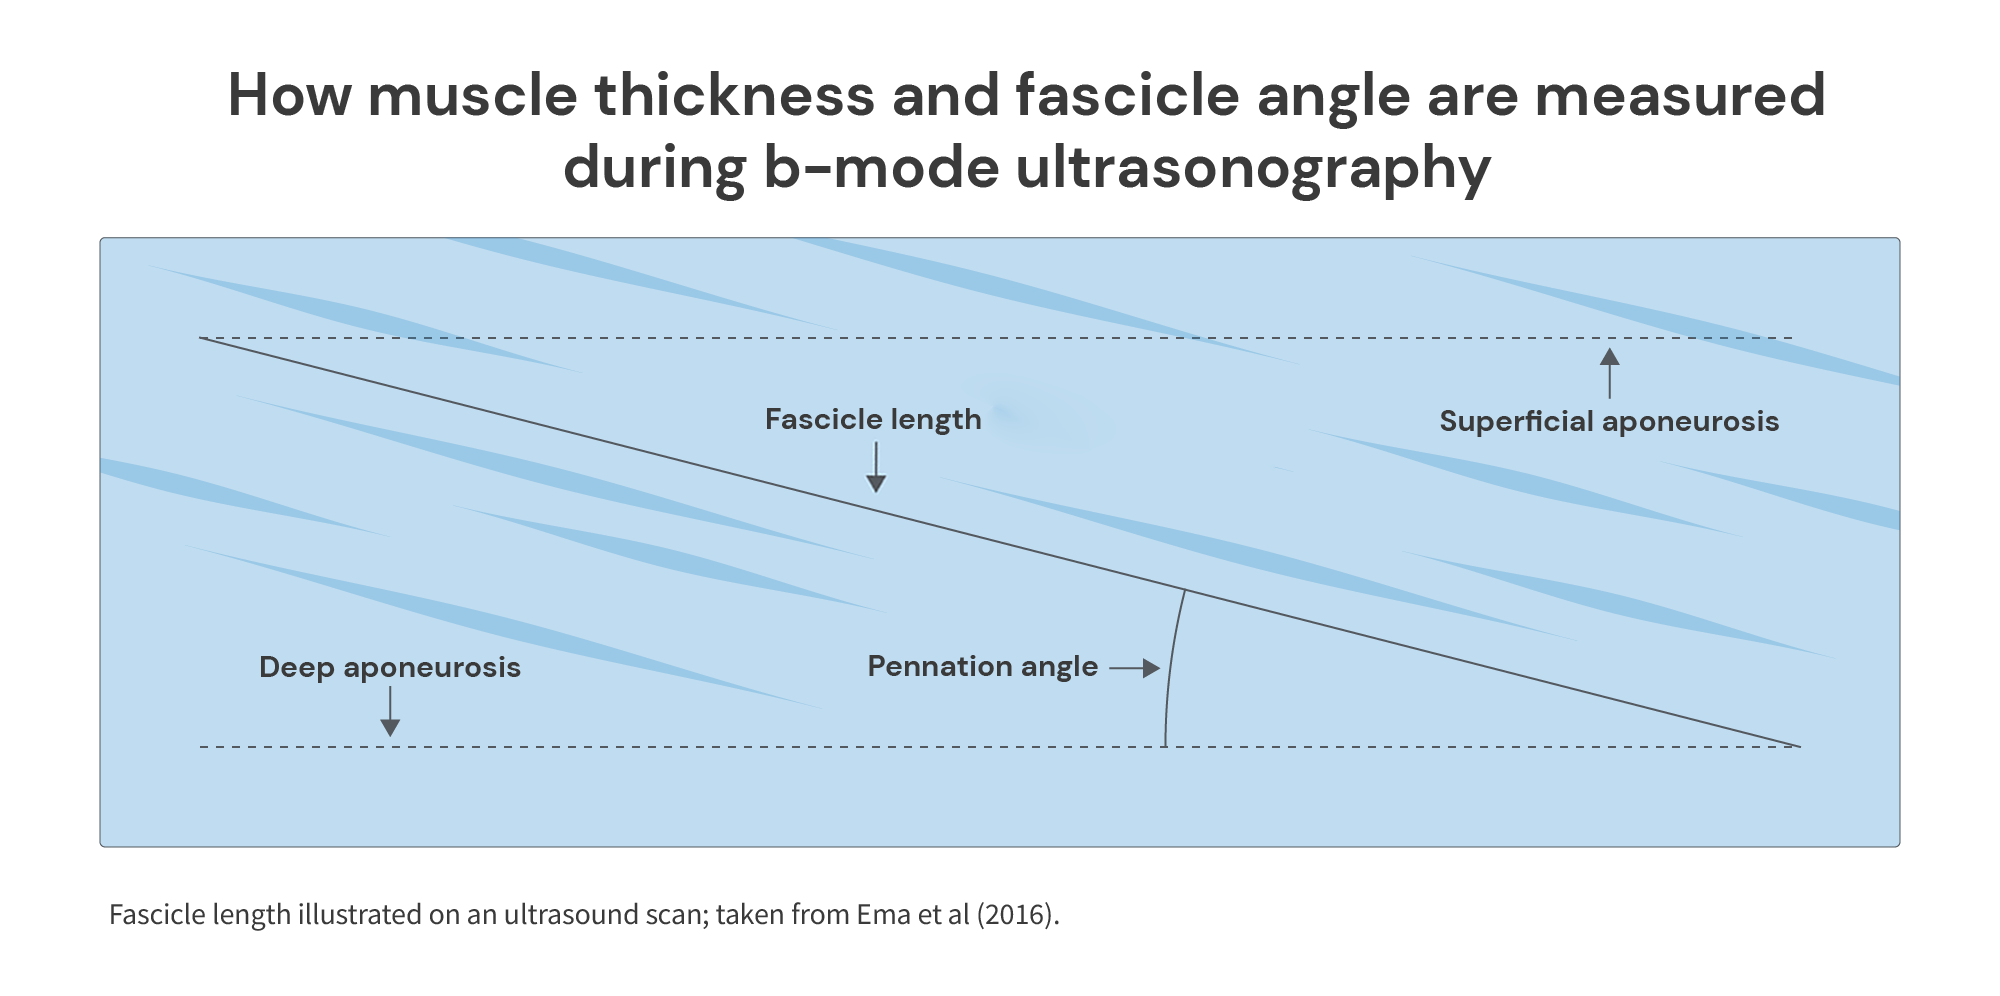 How muscle thickness and fascicle angle are measured during b-mode ultrasonography